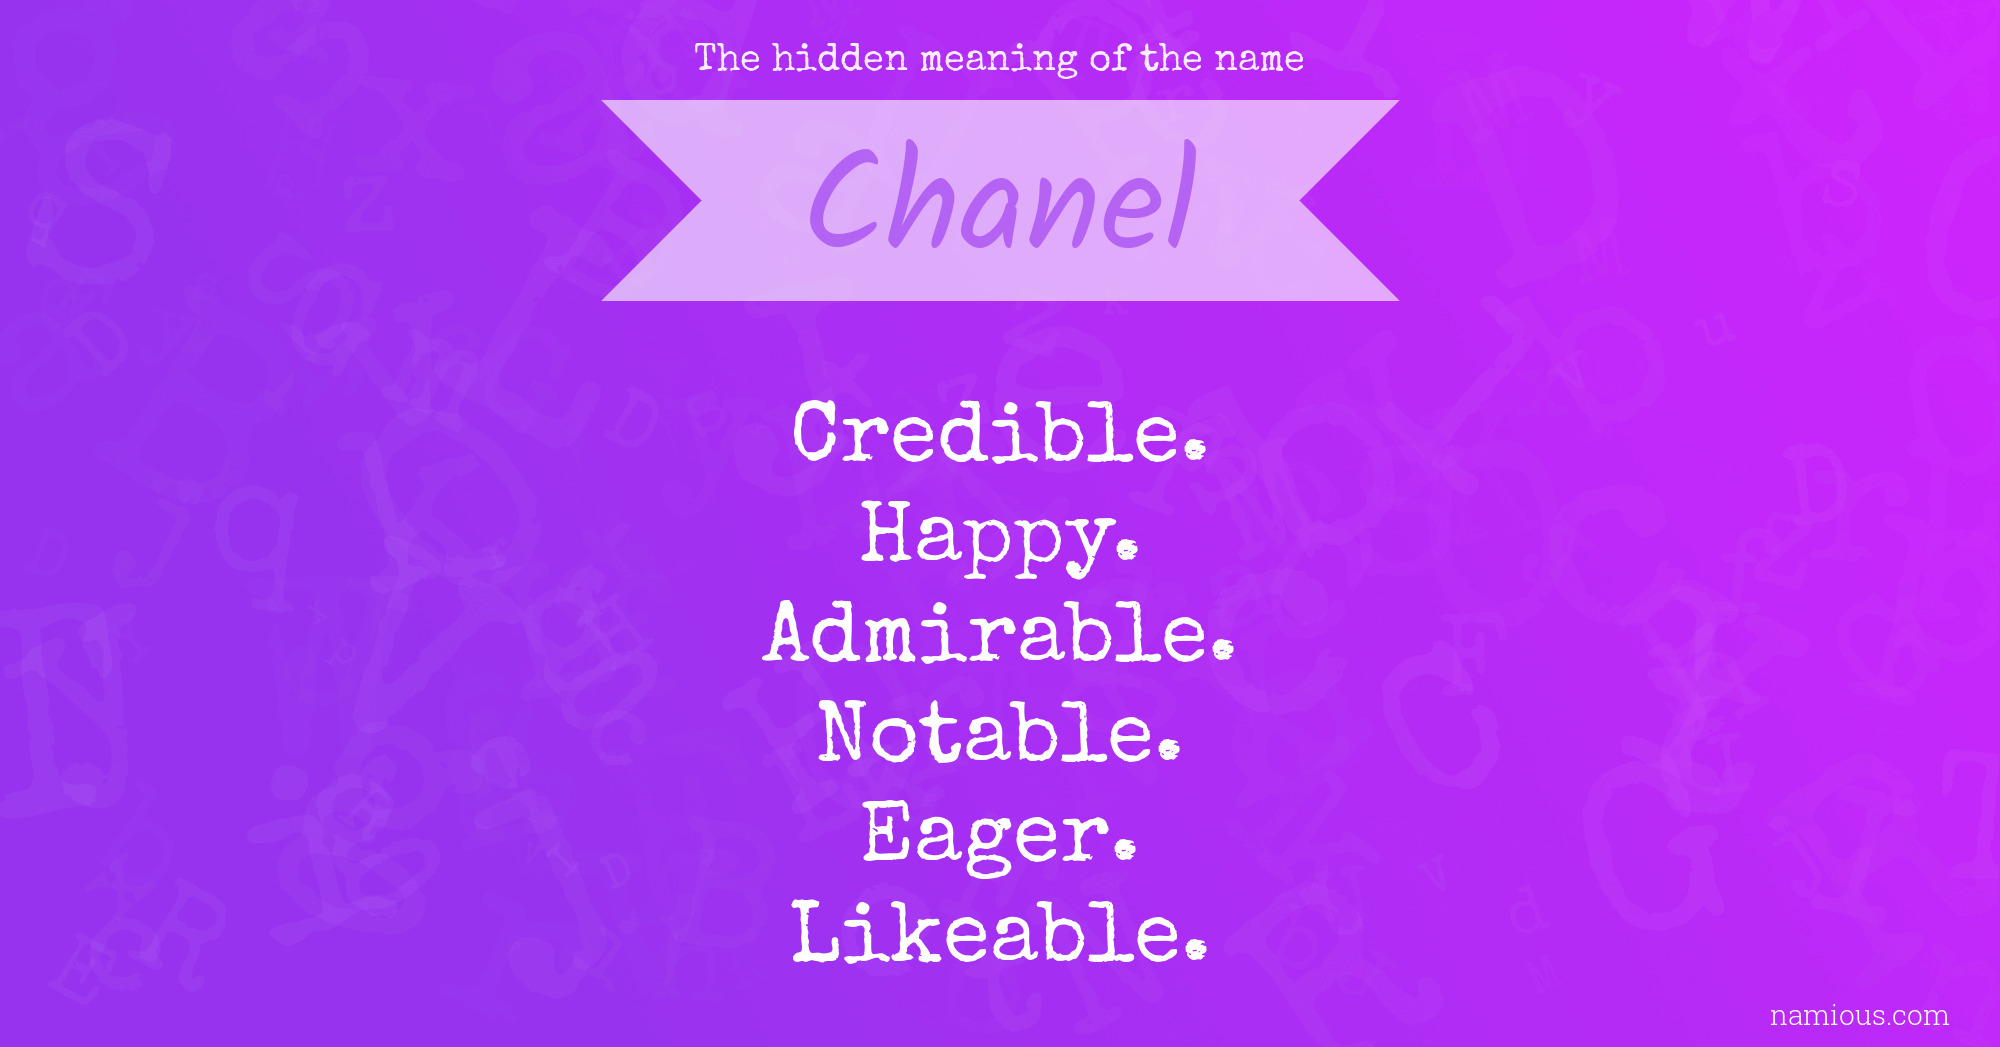 The hidden meaning of the name Chanel